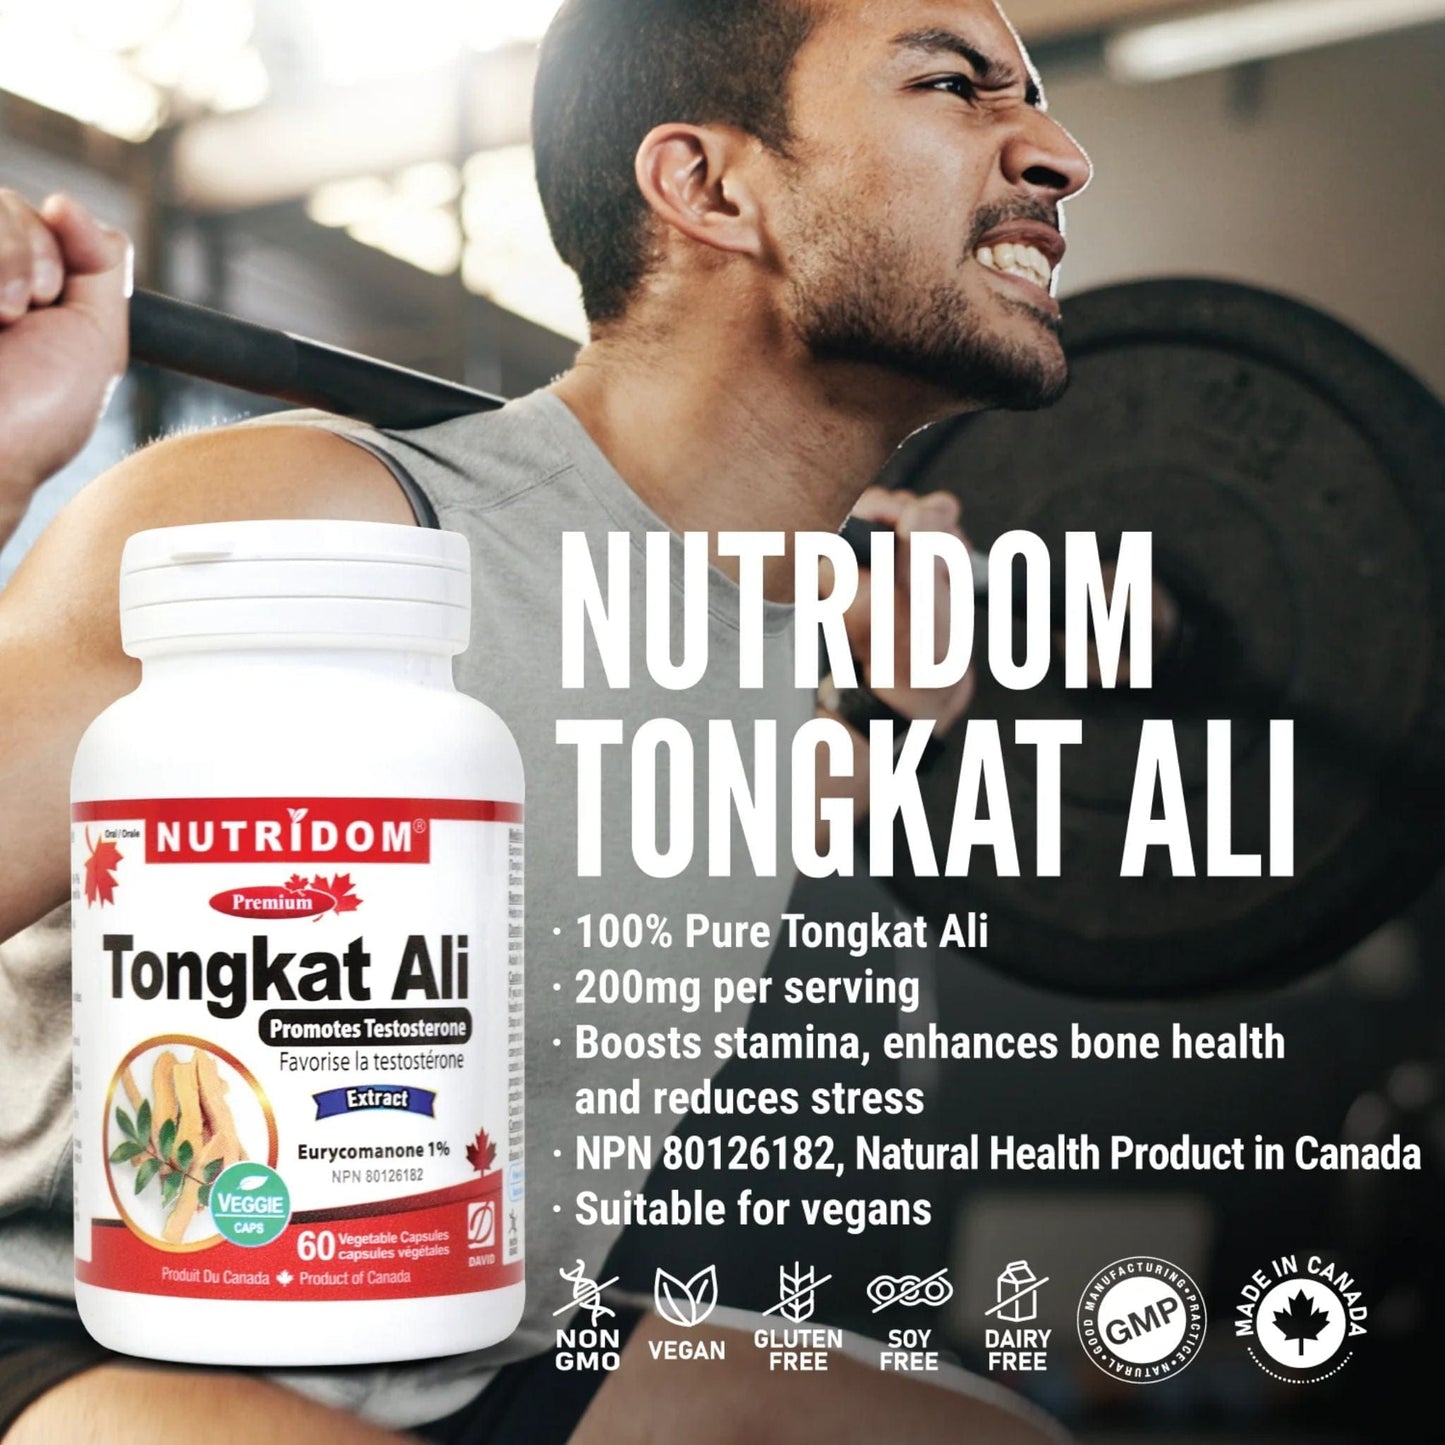 60 Vegetable Capsules | Nutridom Tongkat Ali Extract Bottle with Man lifting weights